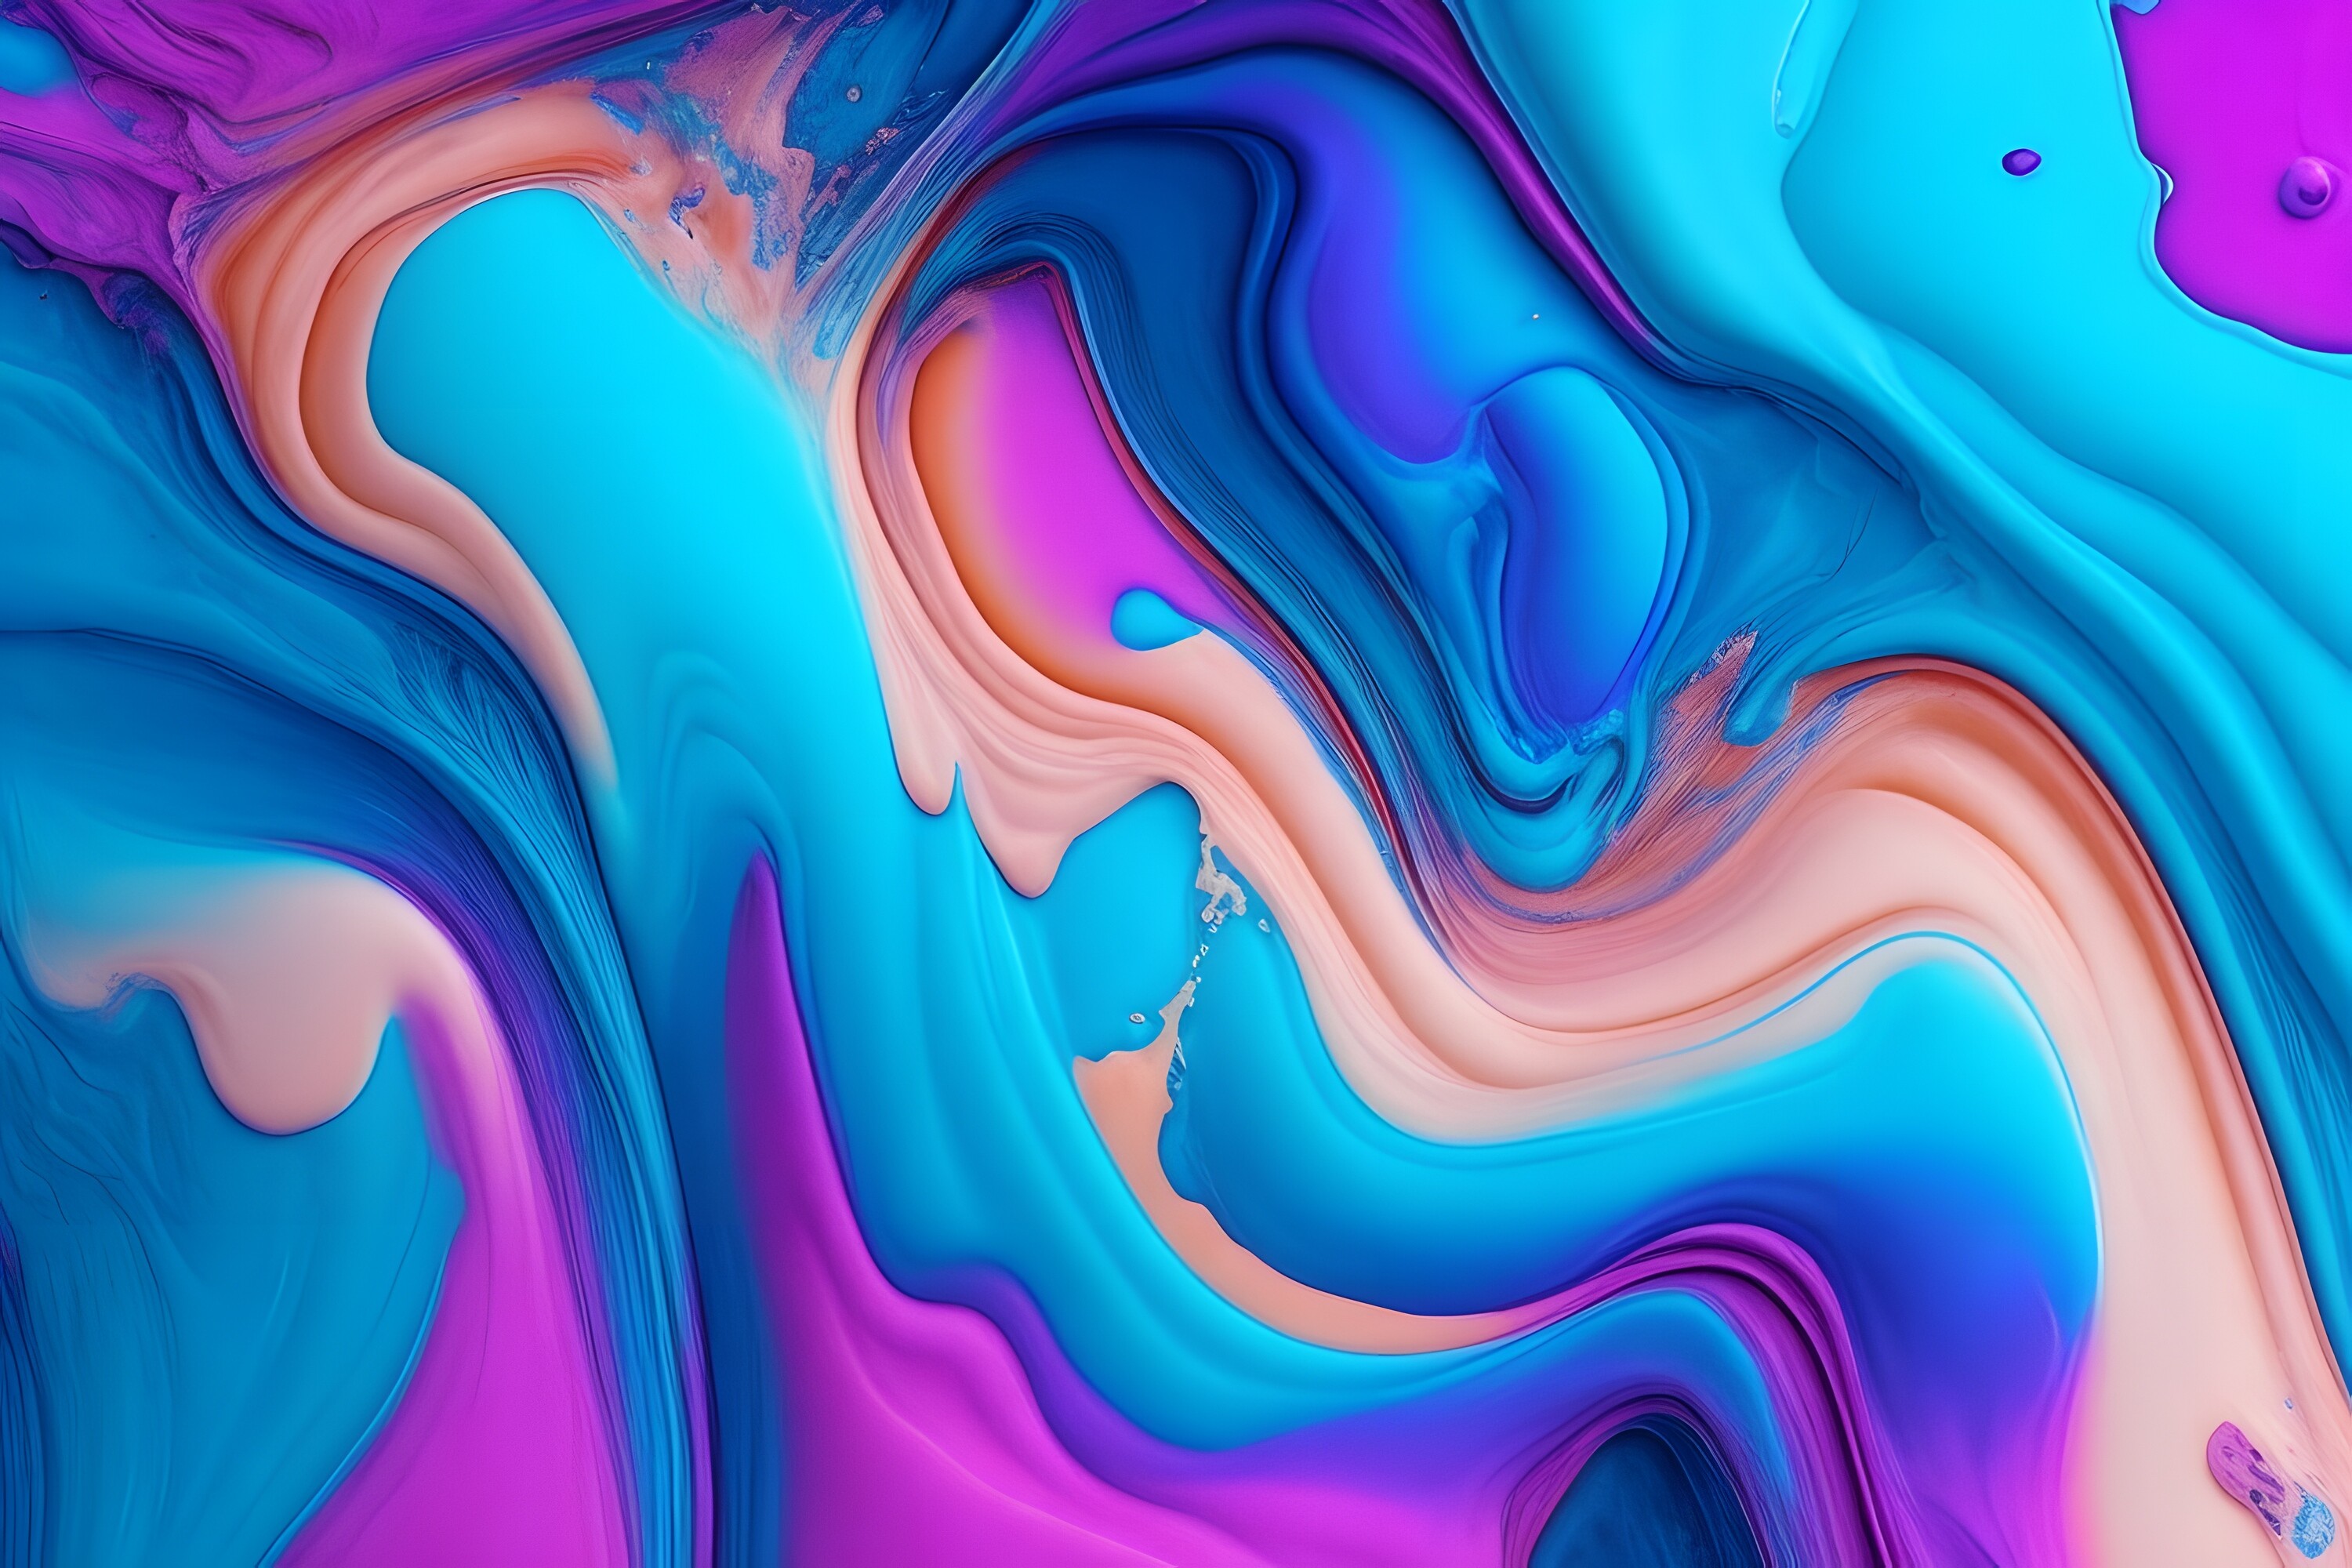 Liquid Paint 3D Effect Background Graphic by Forhadx5 · Creative Fabrica